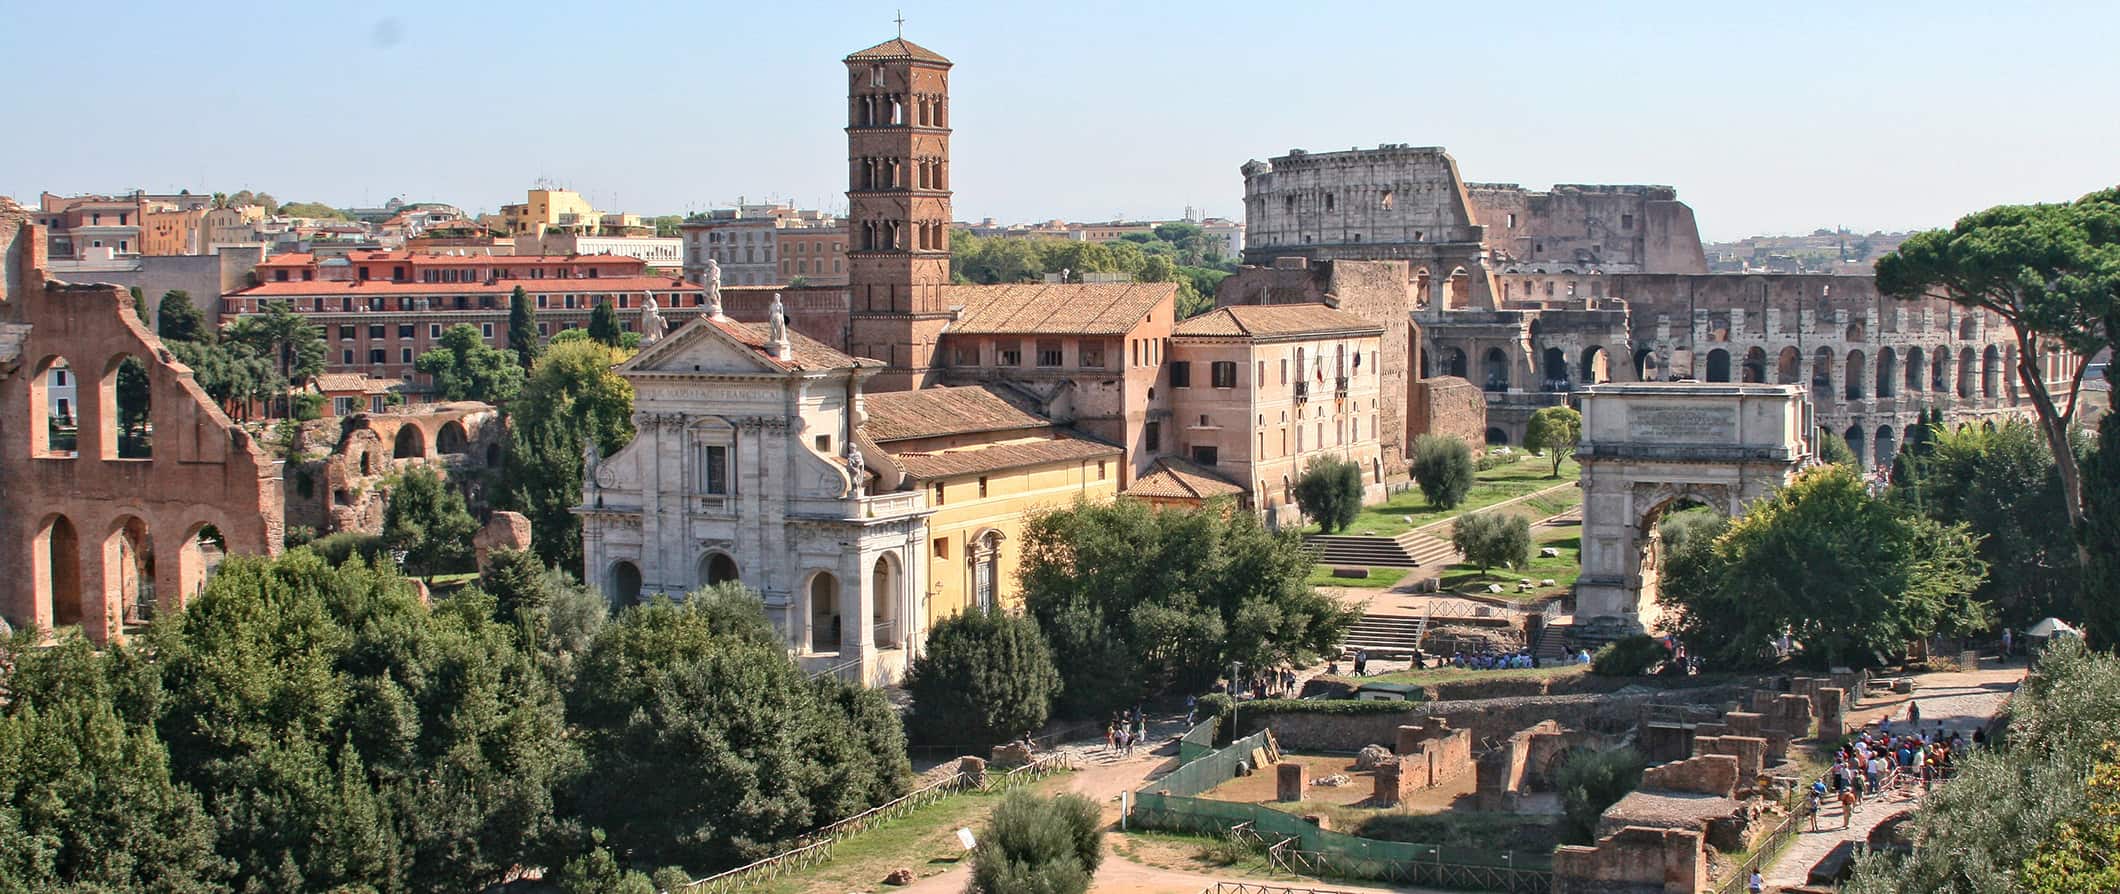 the ruins in Rome, Italy